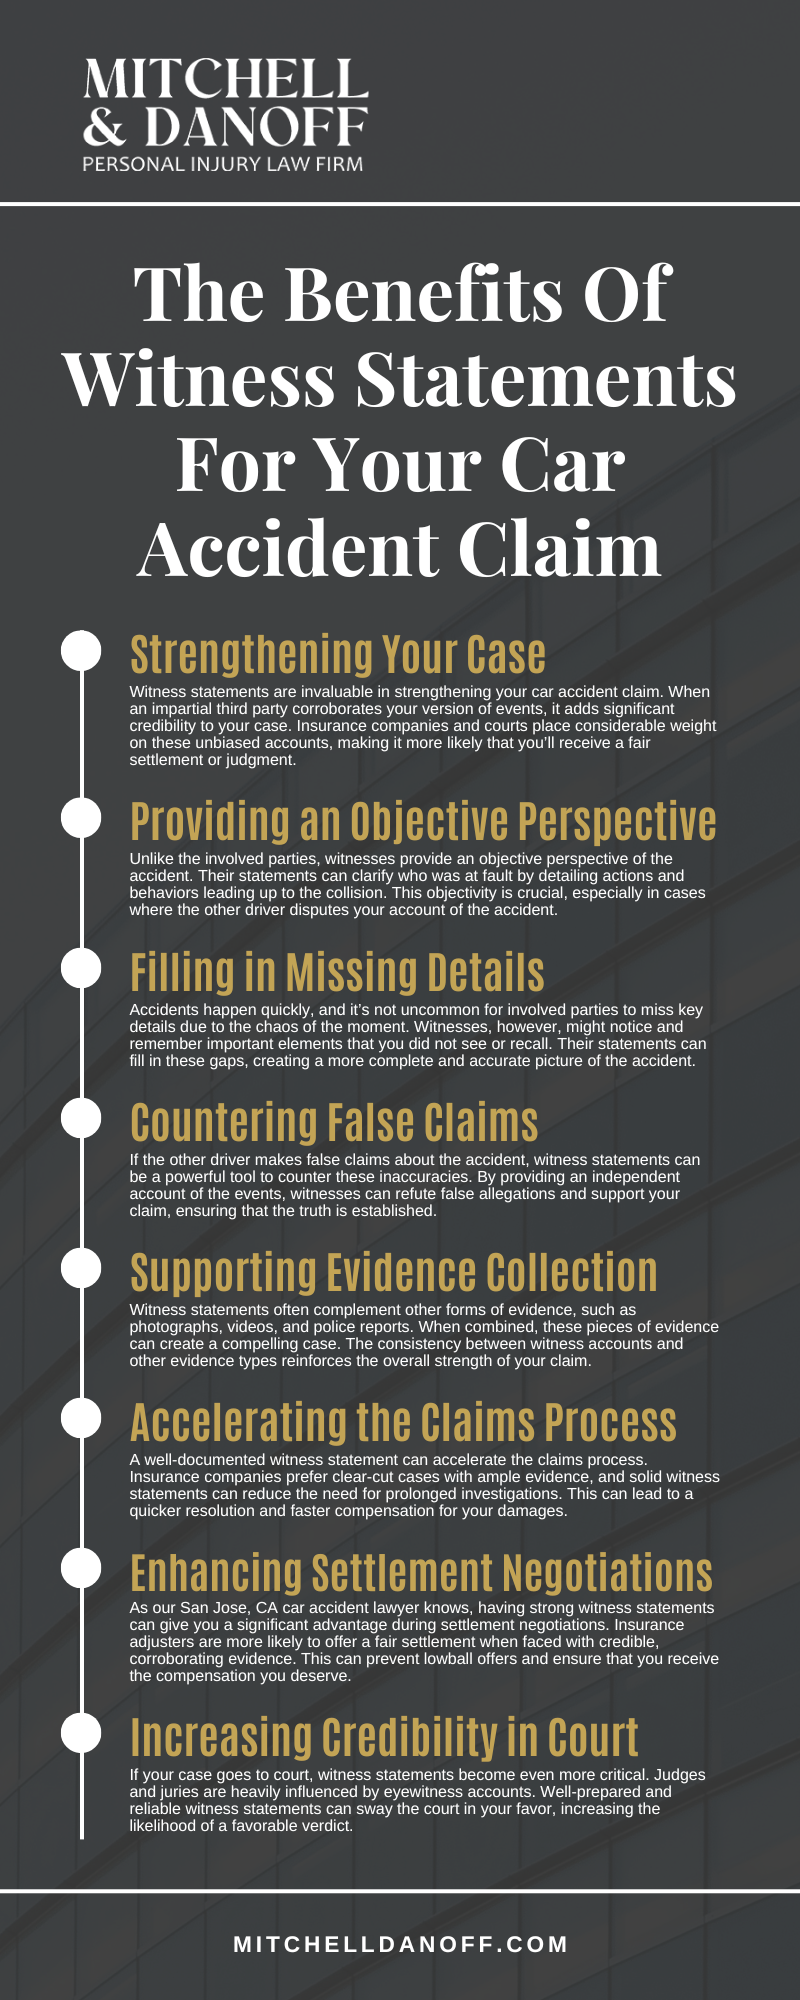 The Benefits Of Witness Statements For Your Car Accident Claim Infographic